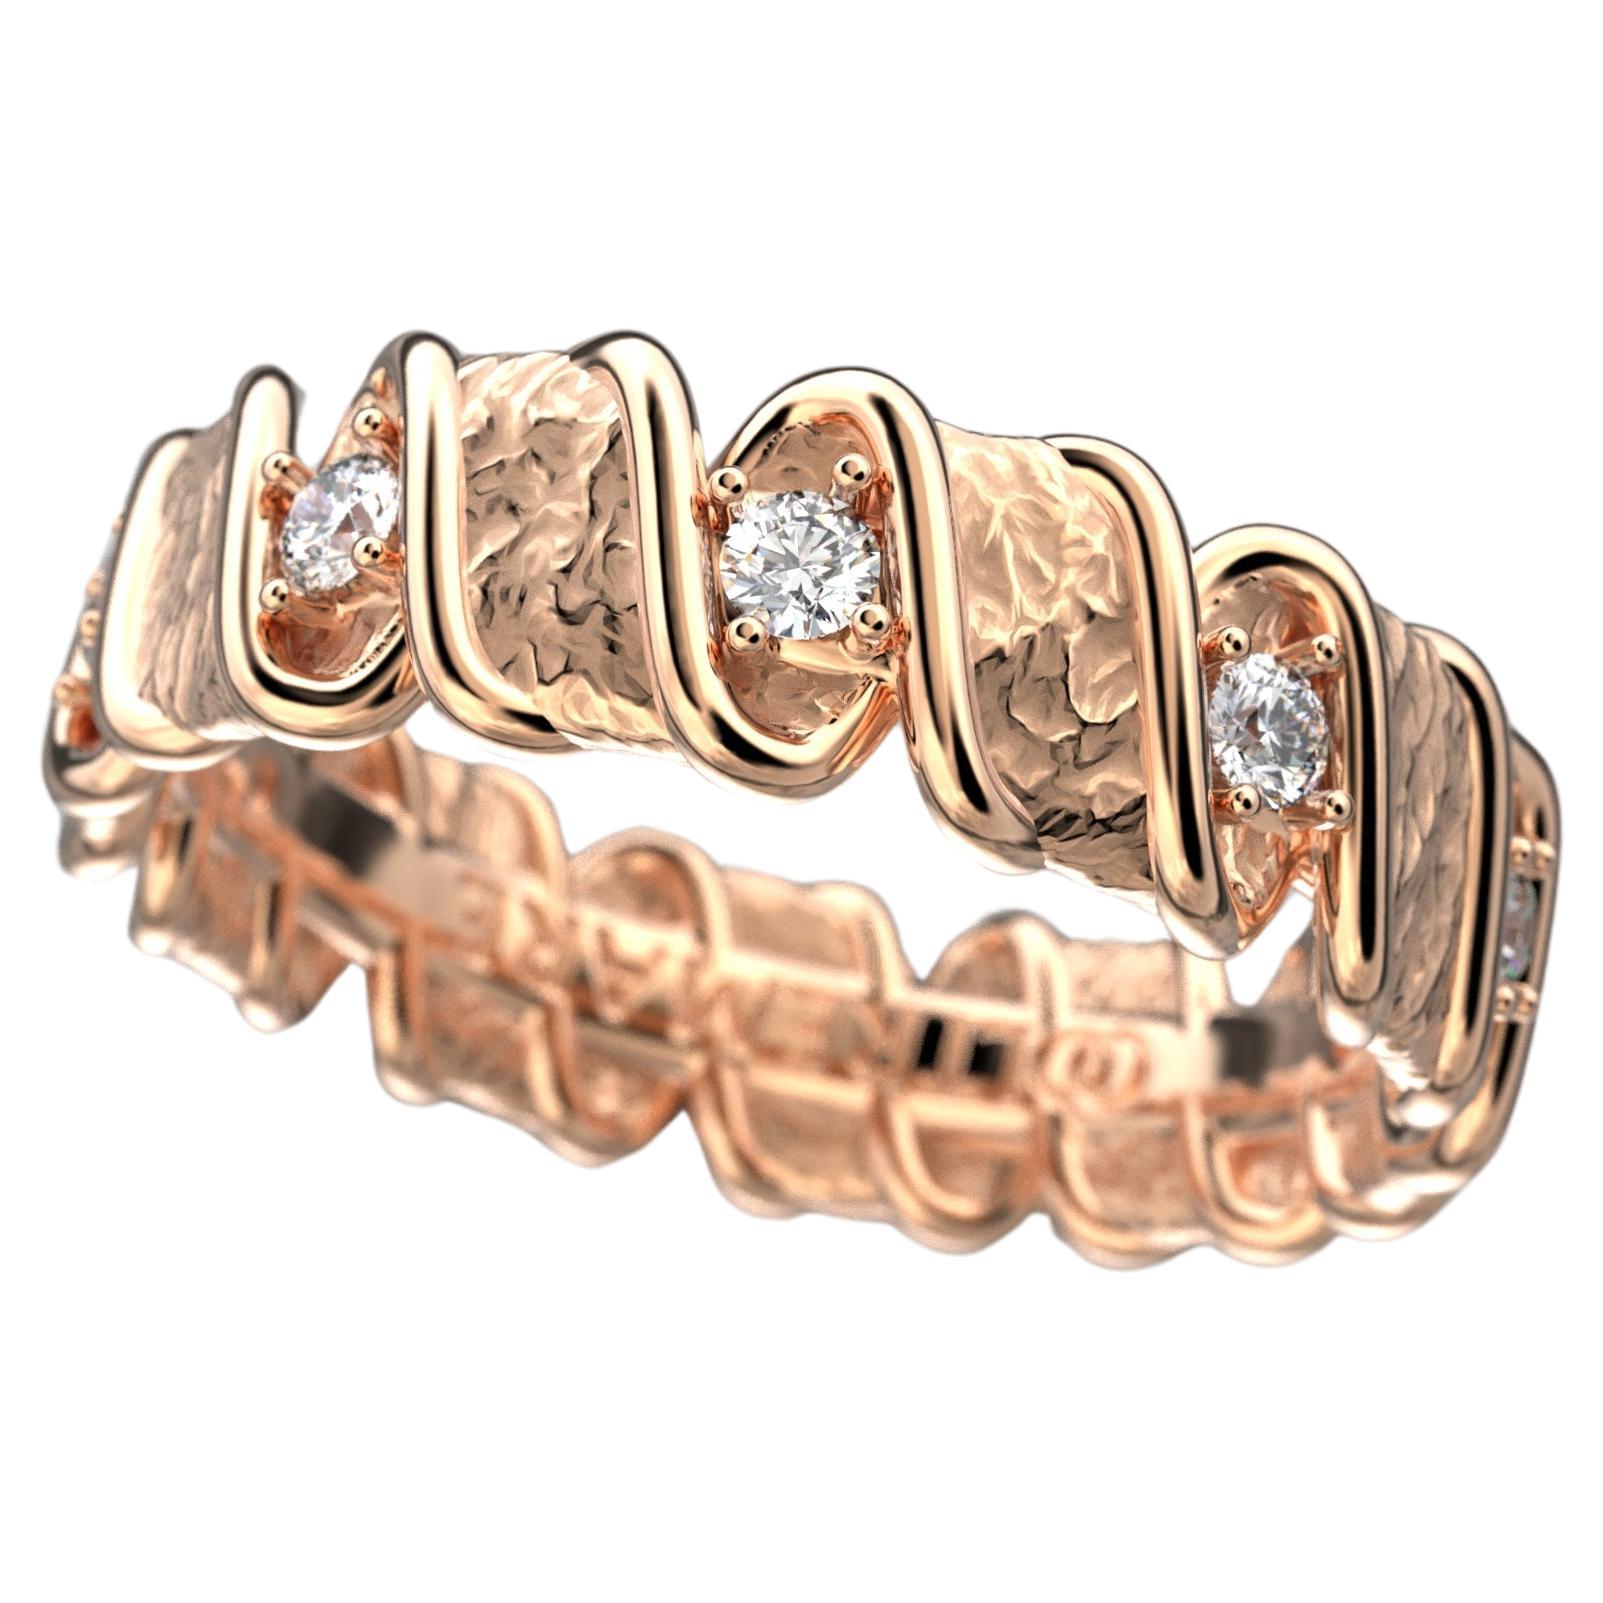 For Sale:  14k Italian Gold Eternity Band with Natural Diamonds  Oltremare Gioielli